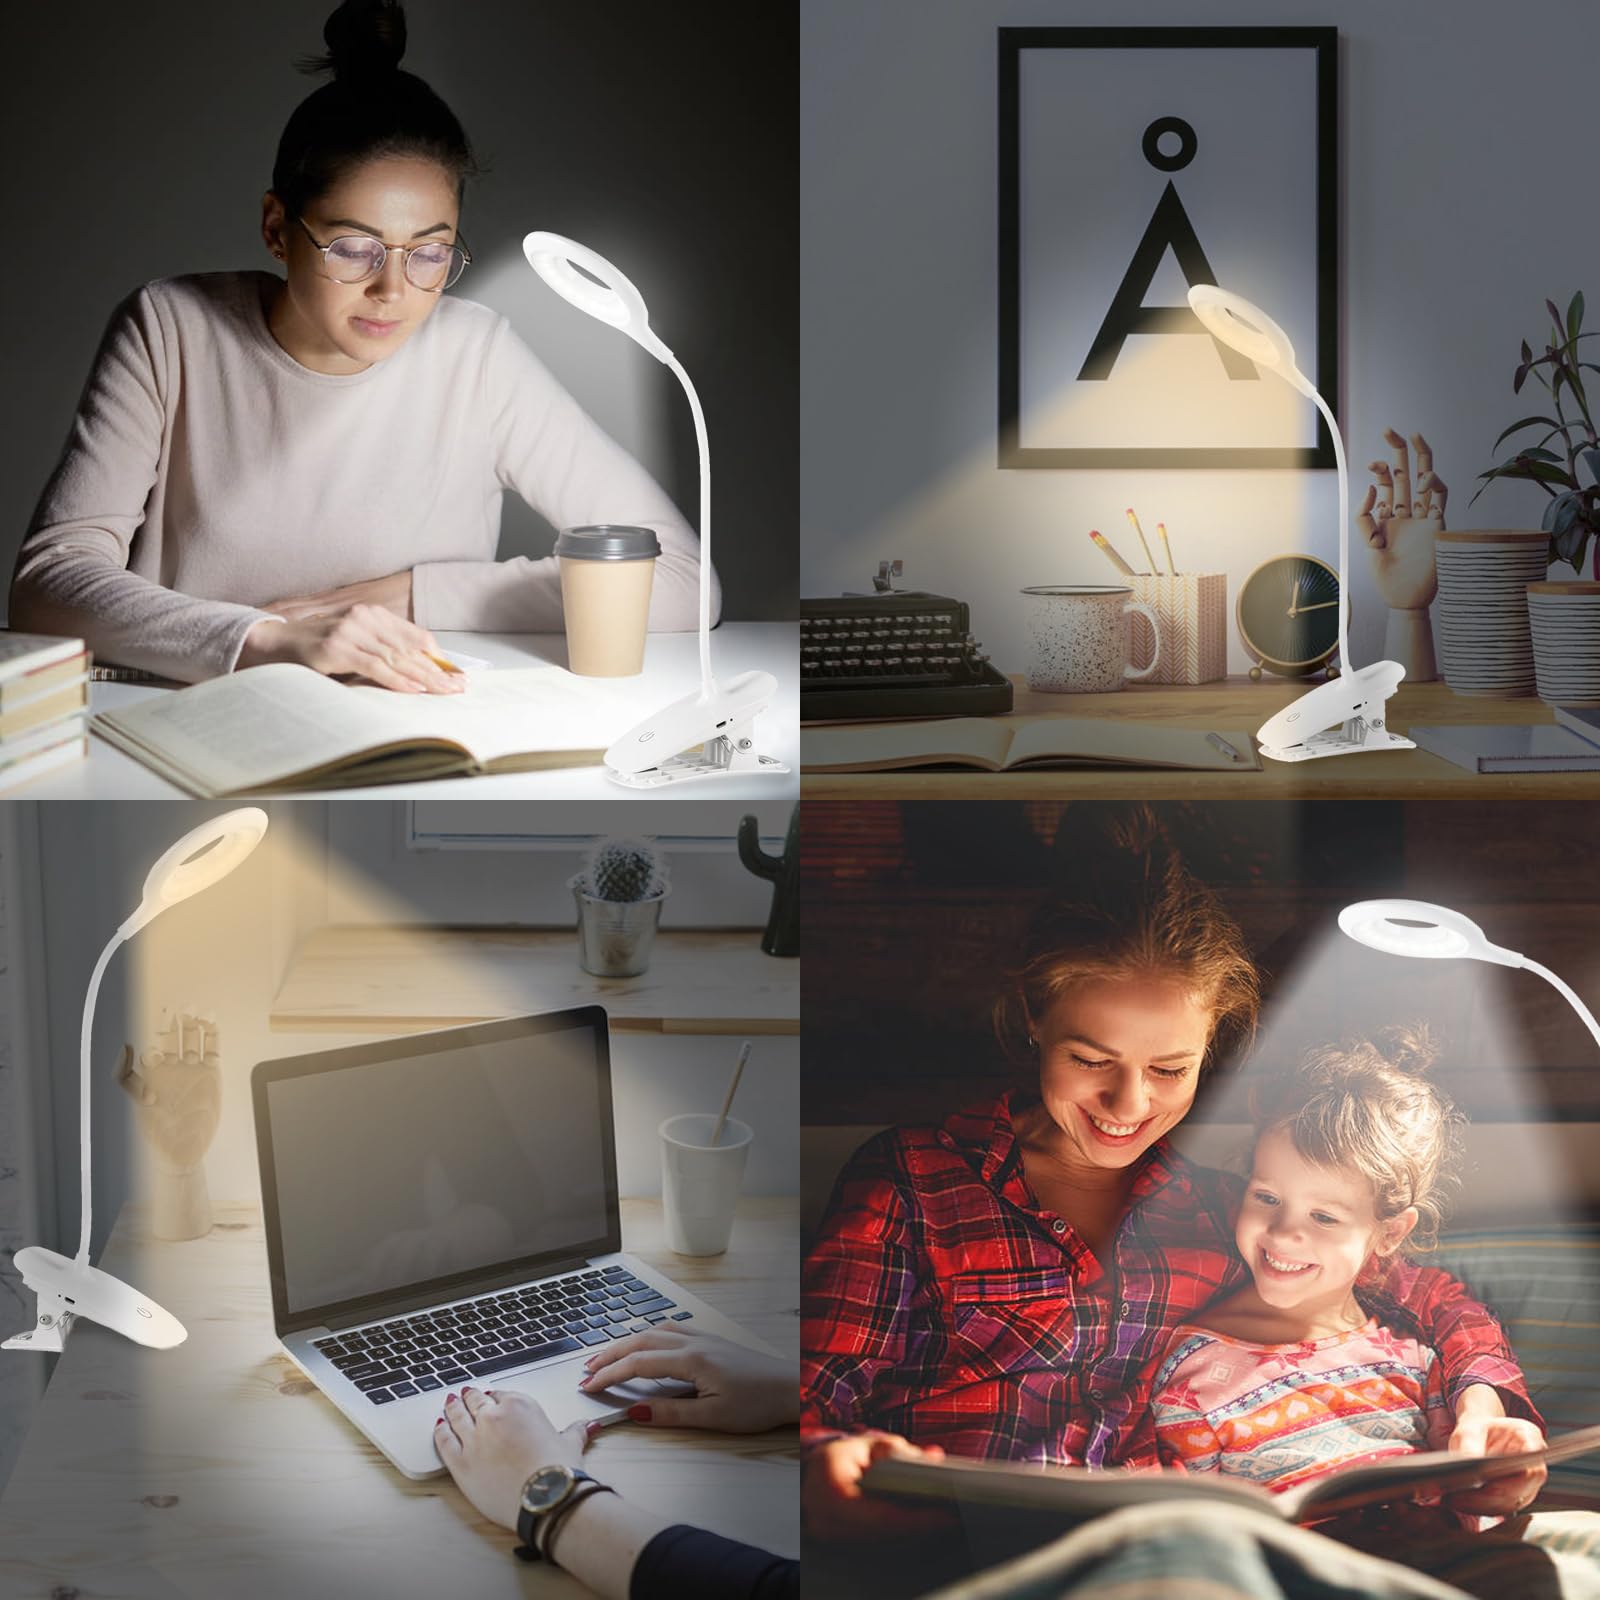 EXTRASTAR Book Light, 24 LEDs USB Reading Lamp, Clip on Light with 3 Color Modes, Touch Control Unlimited Dimmable Eye Protection Desk Light for Headboard, Home, Dormitory, Office